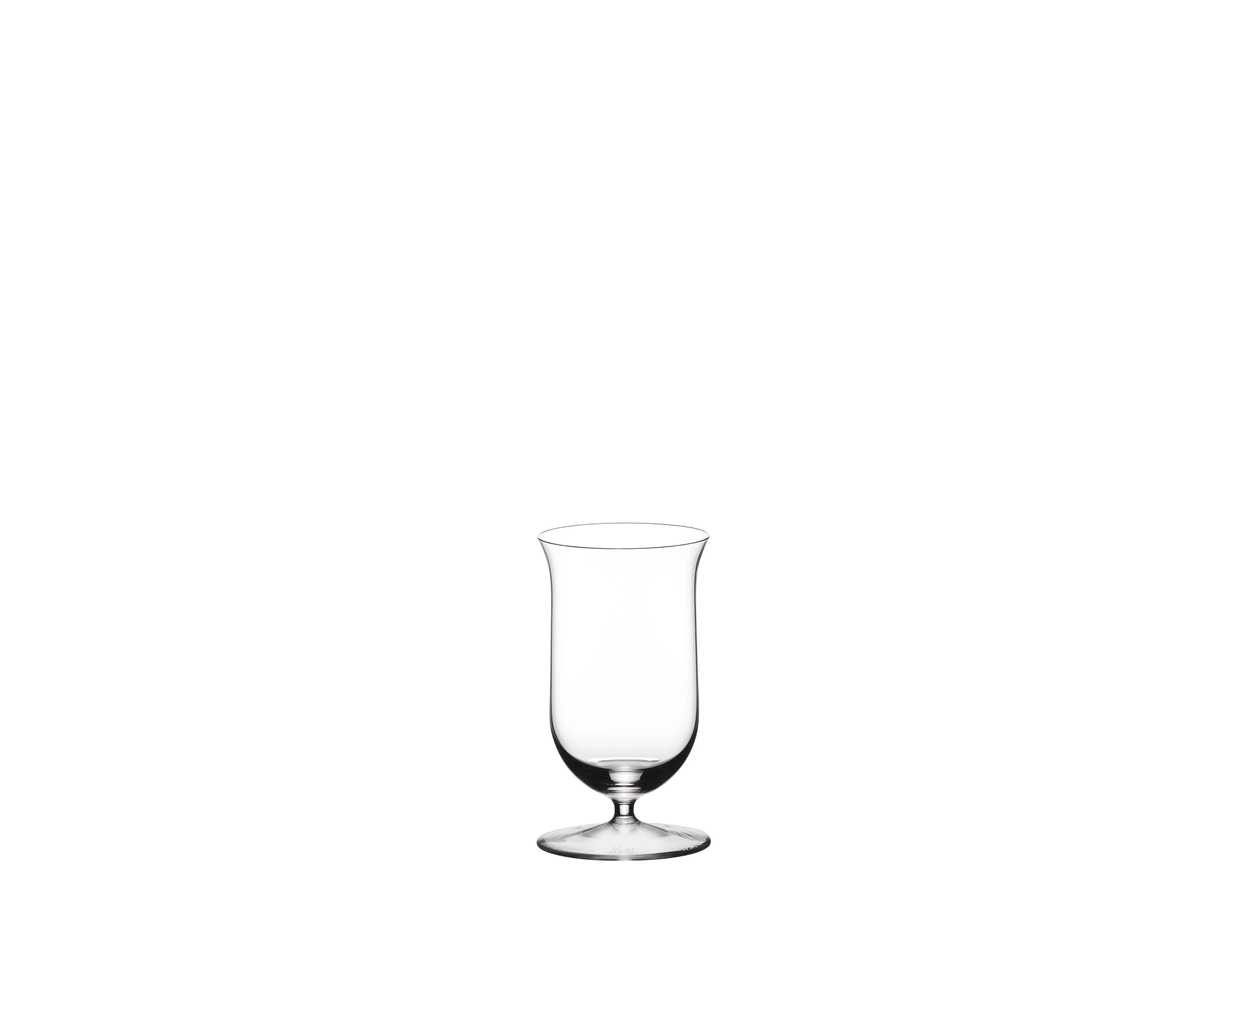 Riedel Sommeliers Single Malt Whiskey Glass, Set of 4 pieces